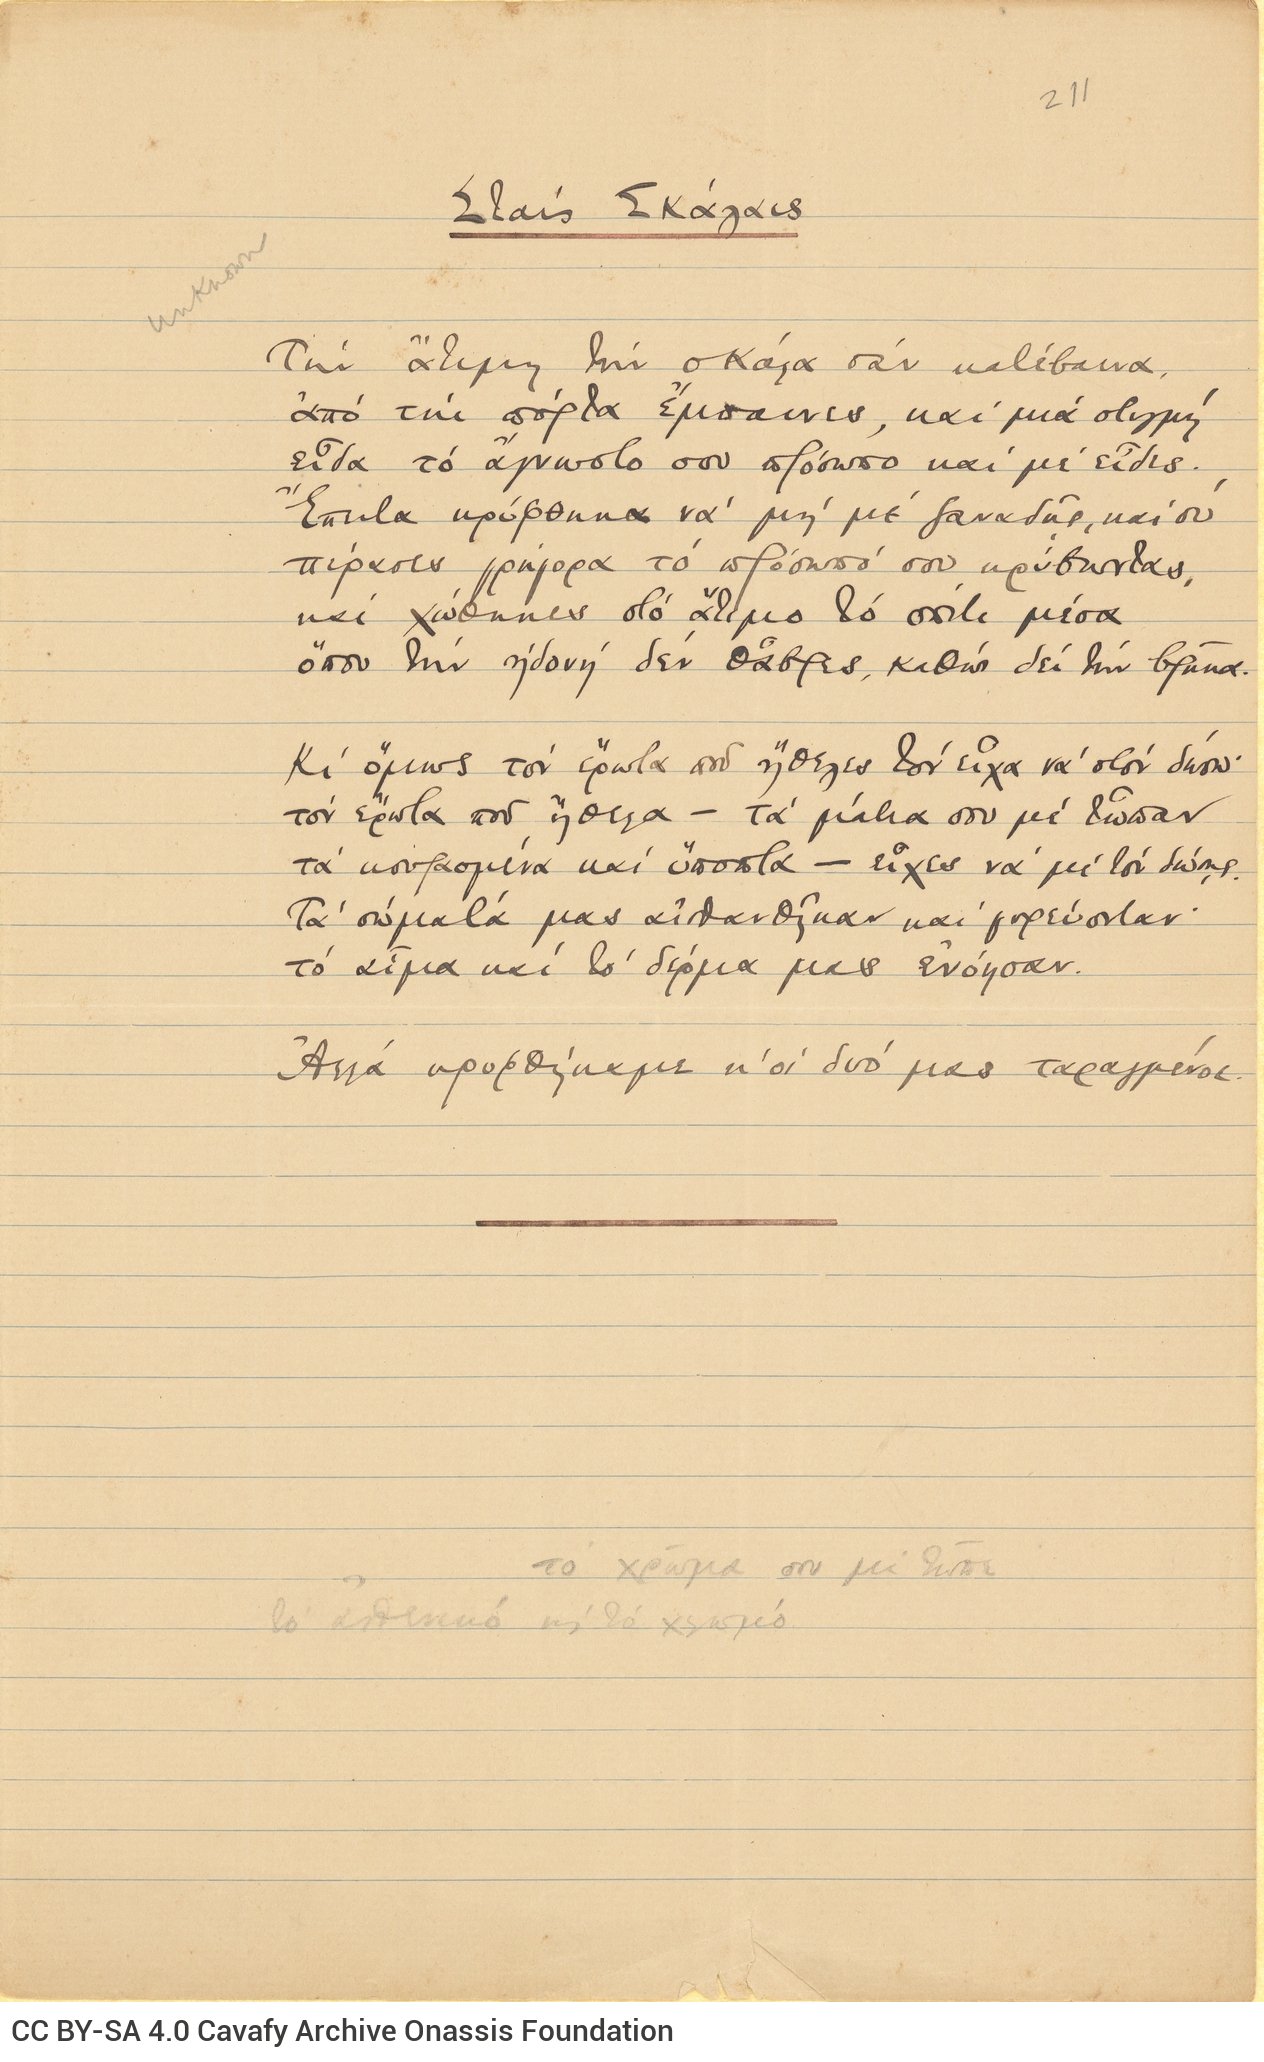 Manuscript of the poem "On the Stairs" and notes in the margin. The title has been underlined and there is a line in red i